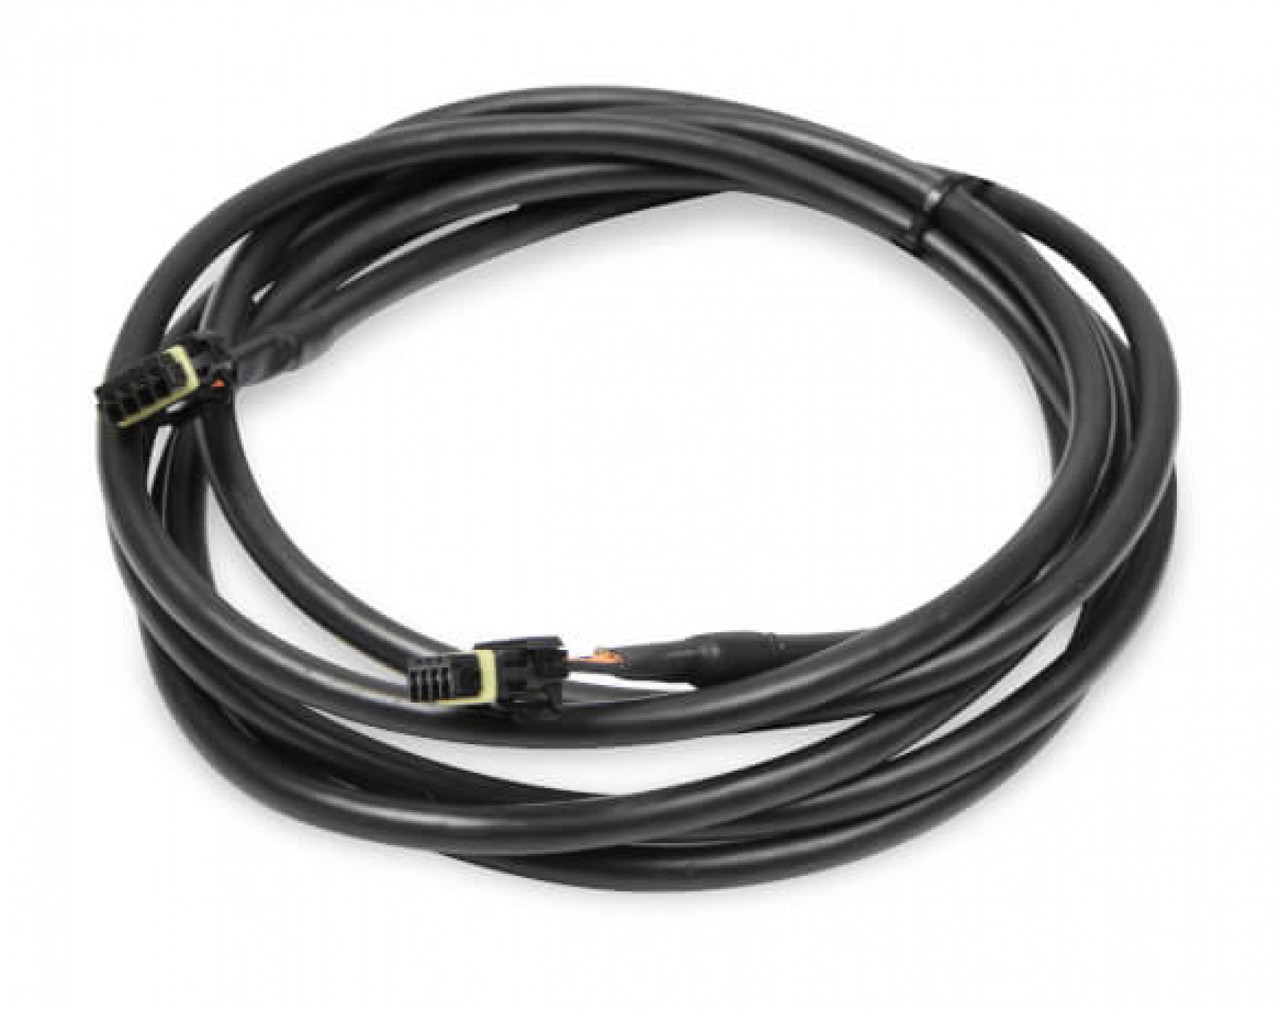 Holley EFI CAN EXTENSION HARNESS, 8FT (HOE-2558-425)